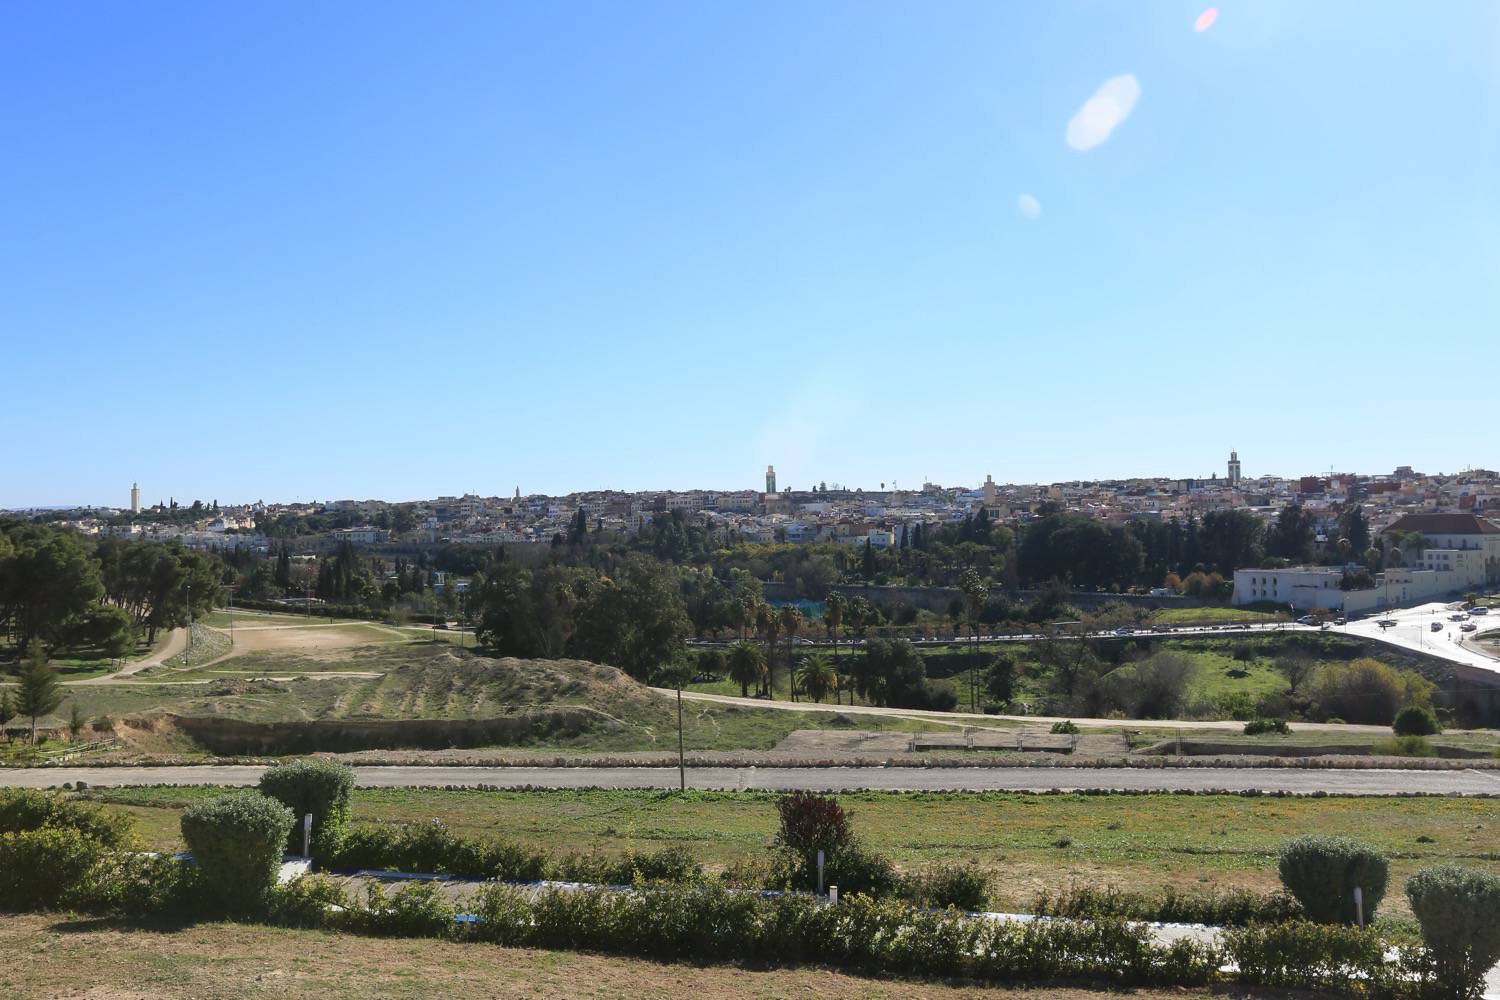 General view of the city of Meknes from the north east